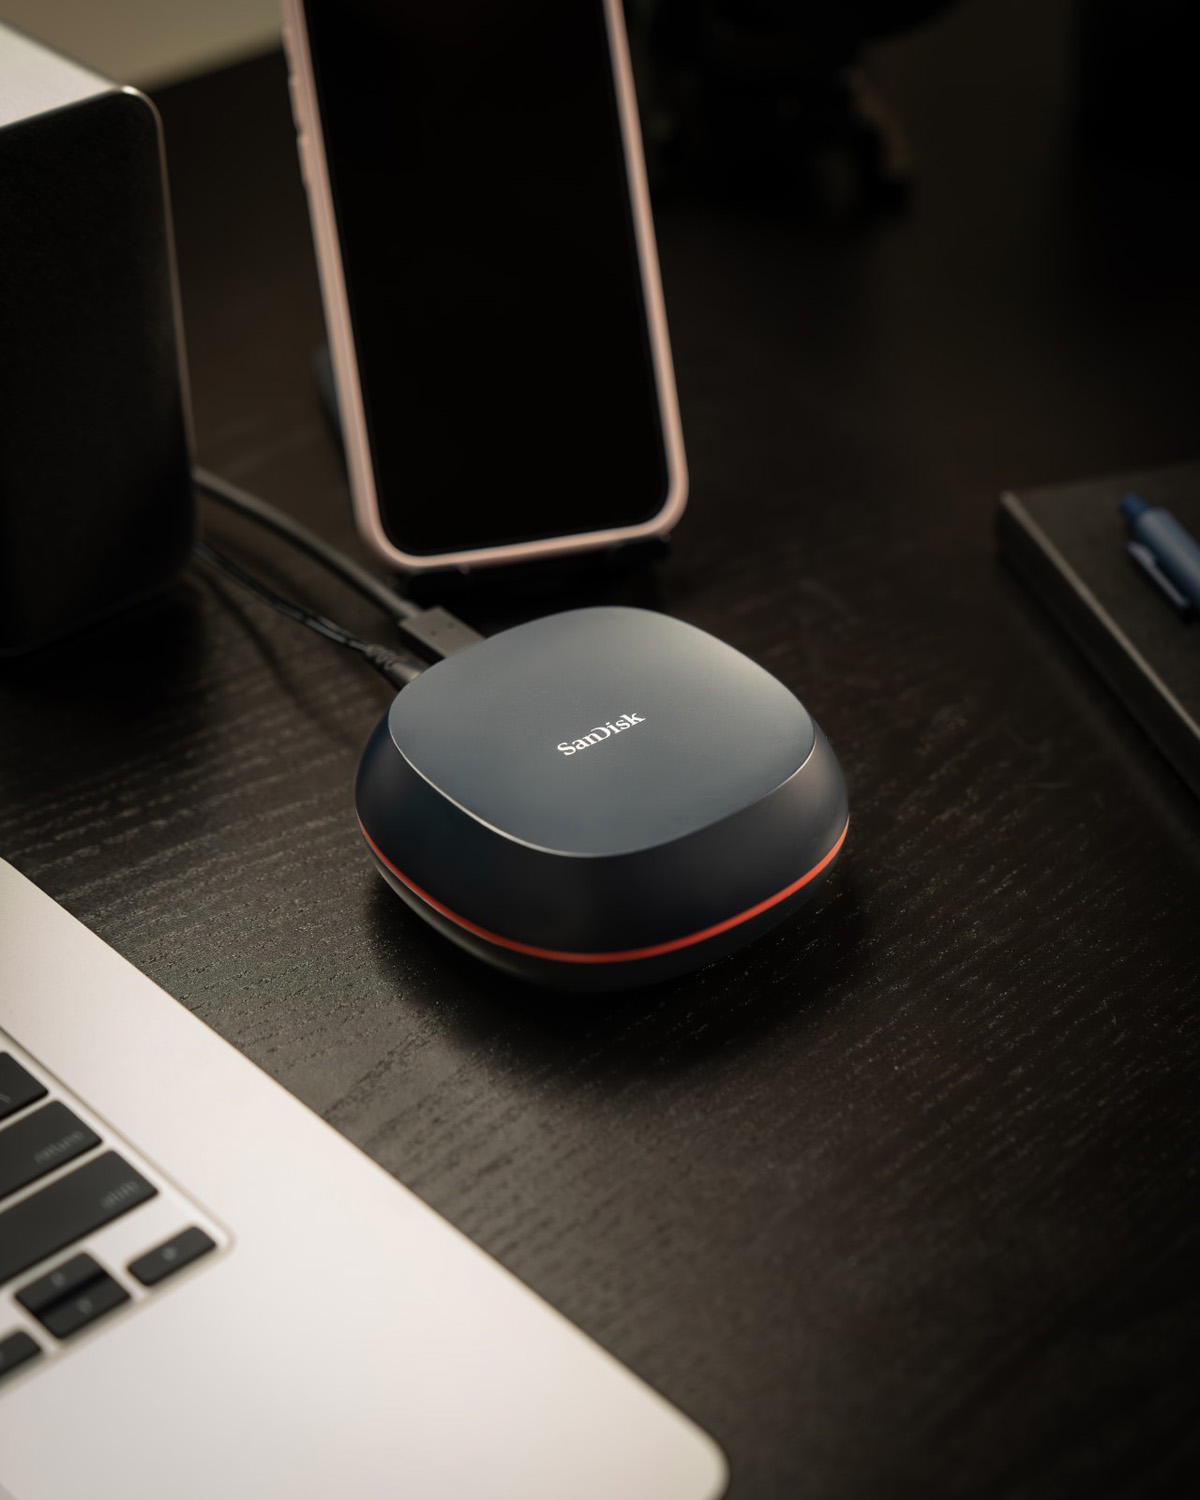 A close-up view of the SanDisk Desk Drive SSD on a dark wooden desk, connected to a laptop via a USB cable, with a smartphone propped up next to it. The drive features a sleek design with a grey top and an orange accent line.